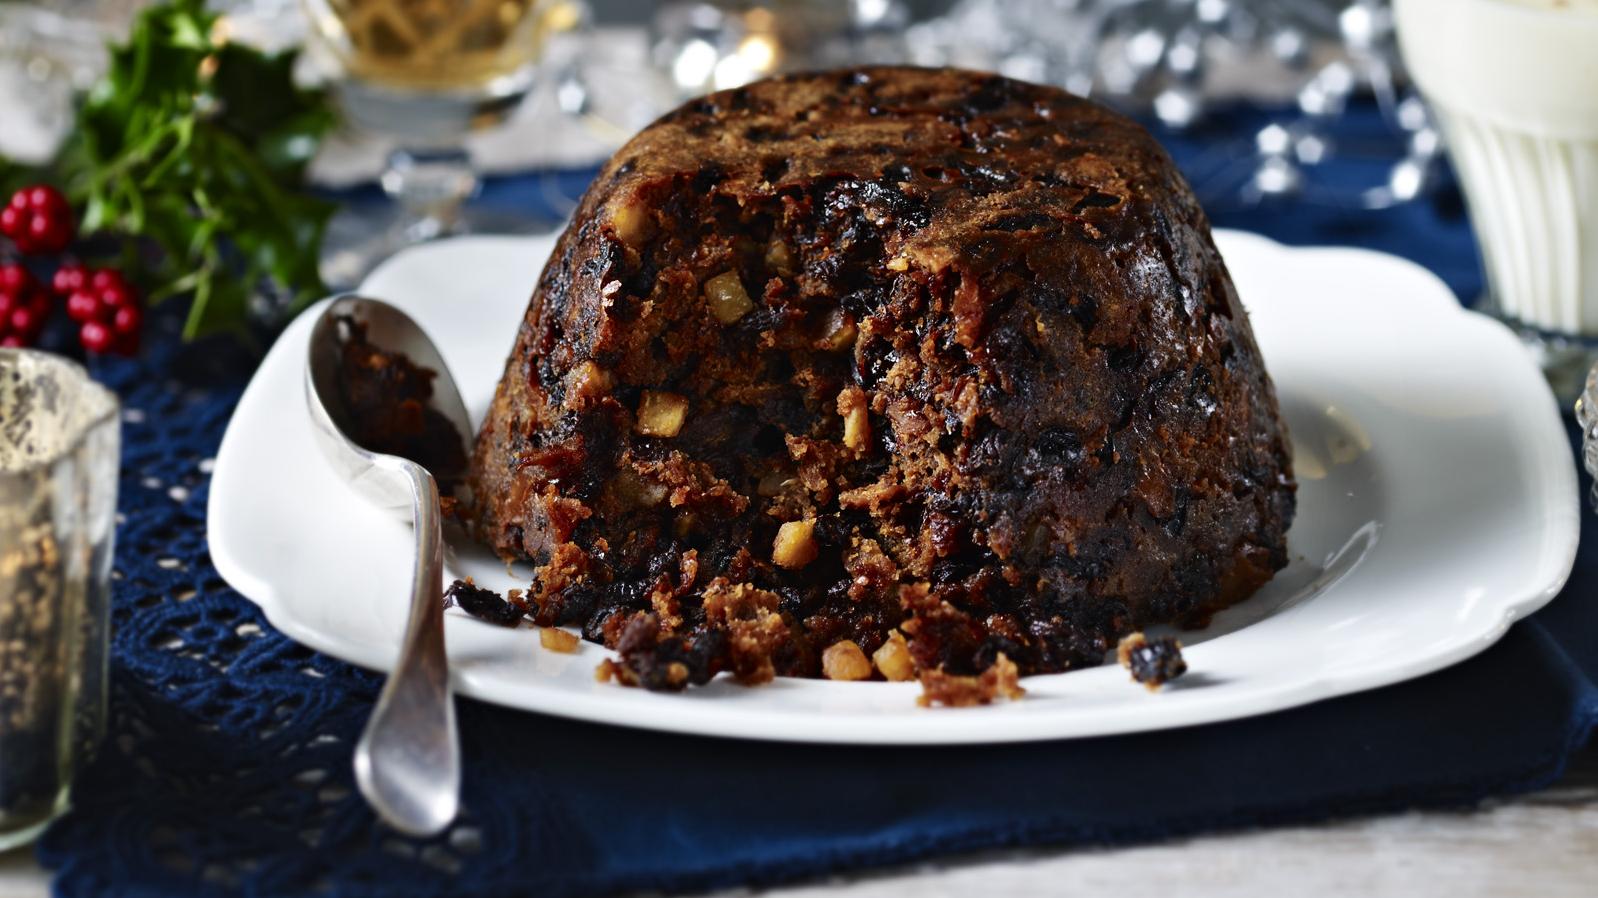  The traditional English Christmas pudding is a delightful combination of flavors and textures that will leave your taste buds wanting more.